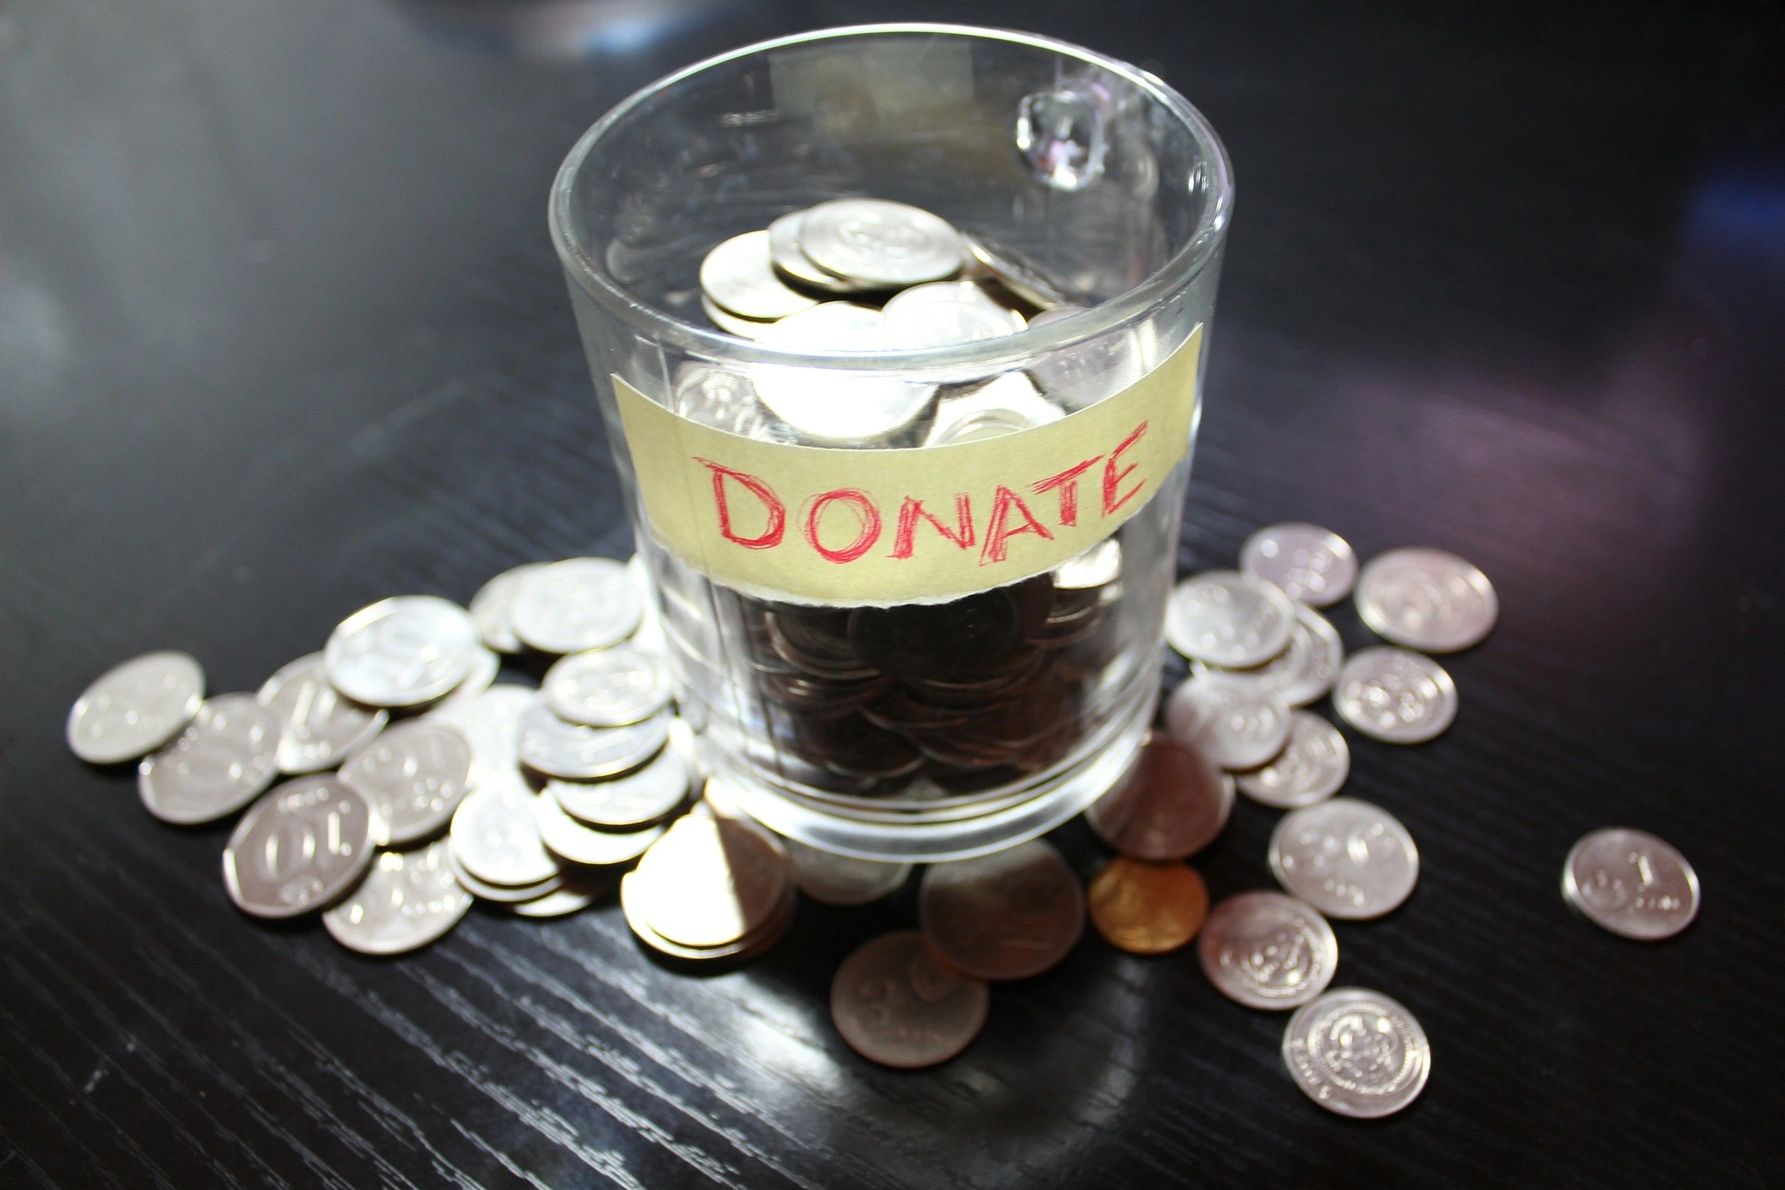 small glass with a label that says "donate", there are coins in the glass and around it